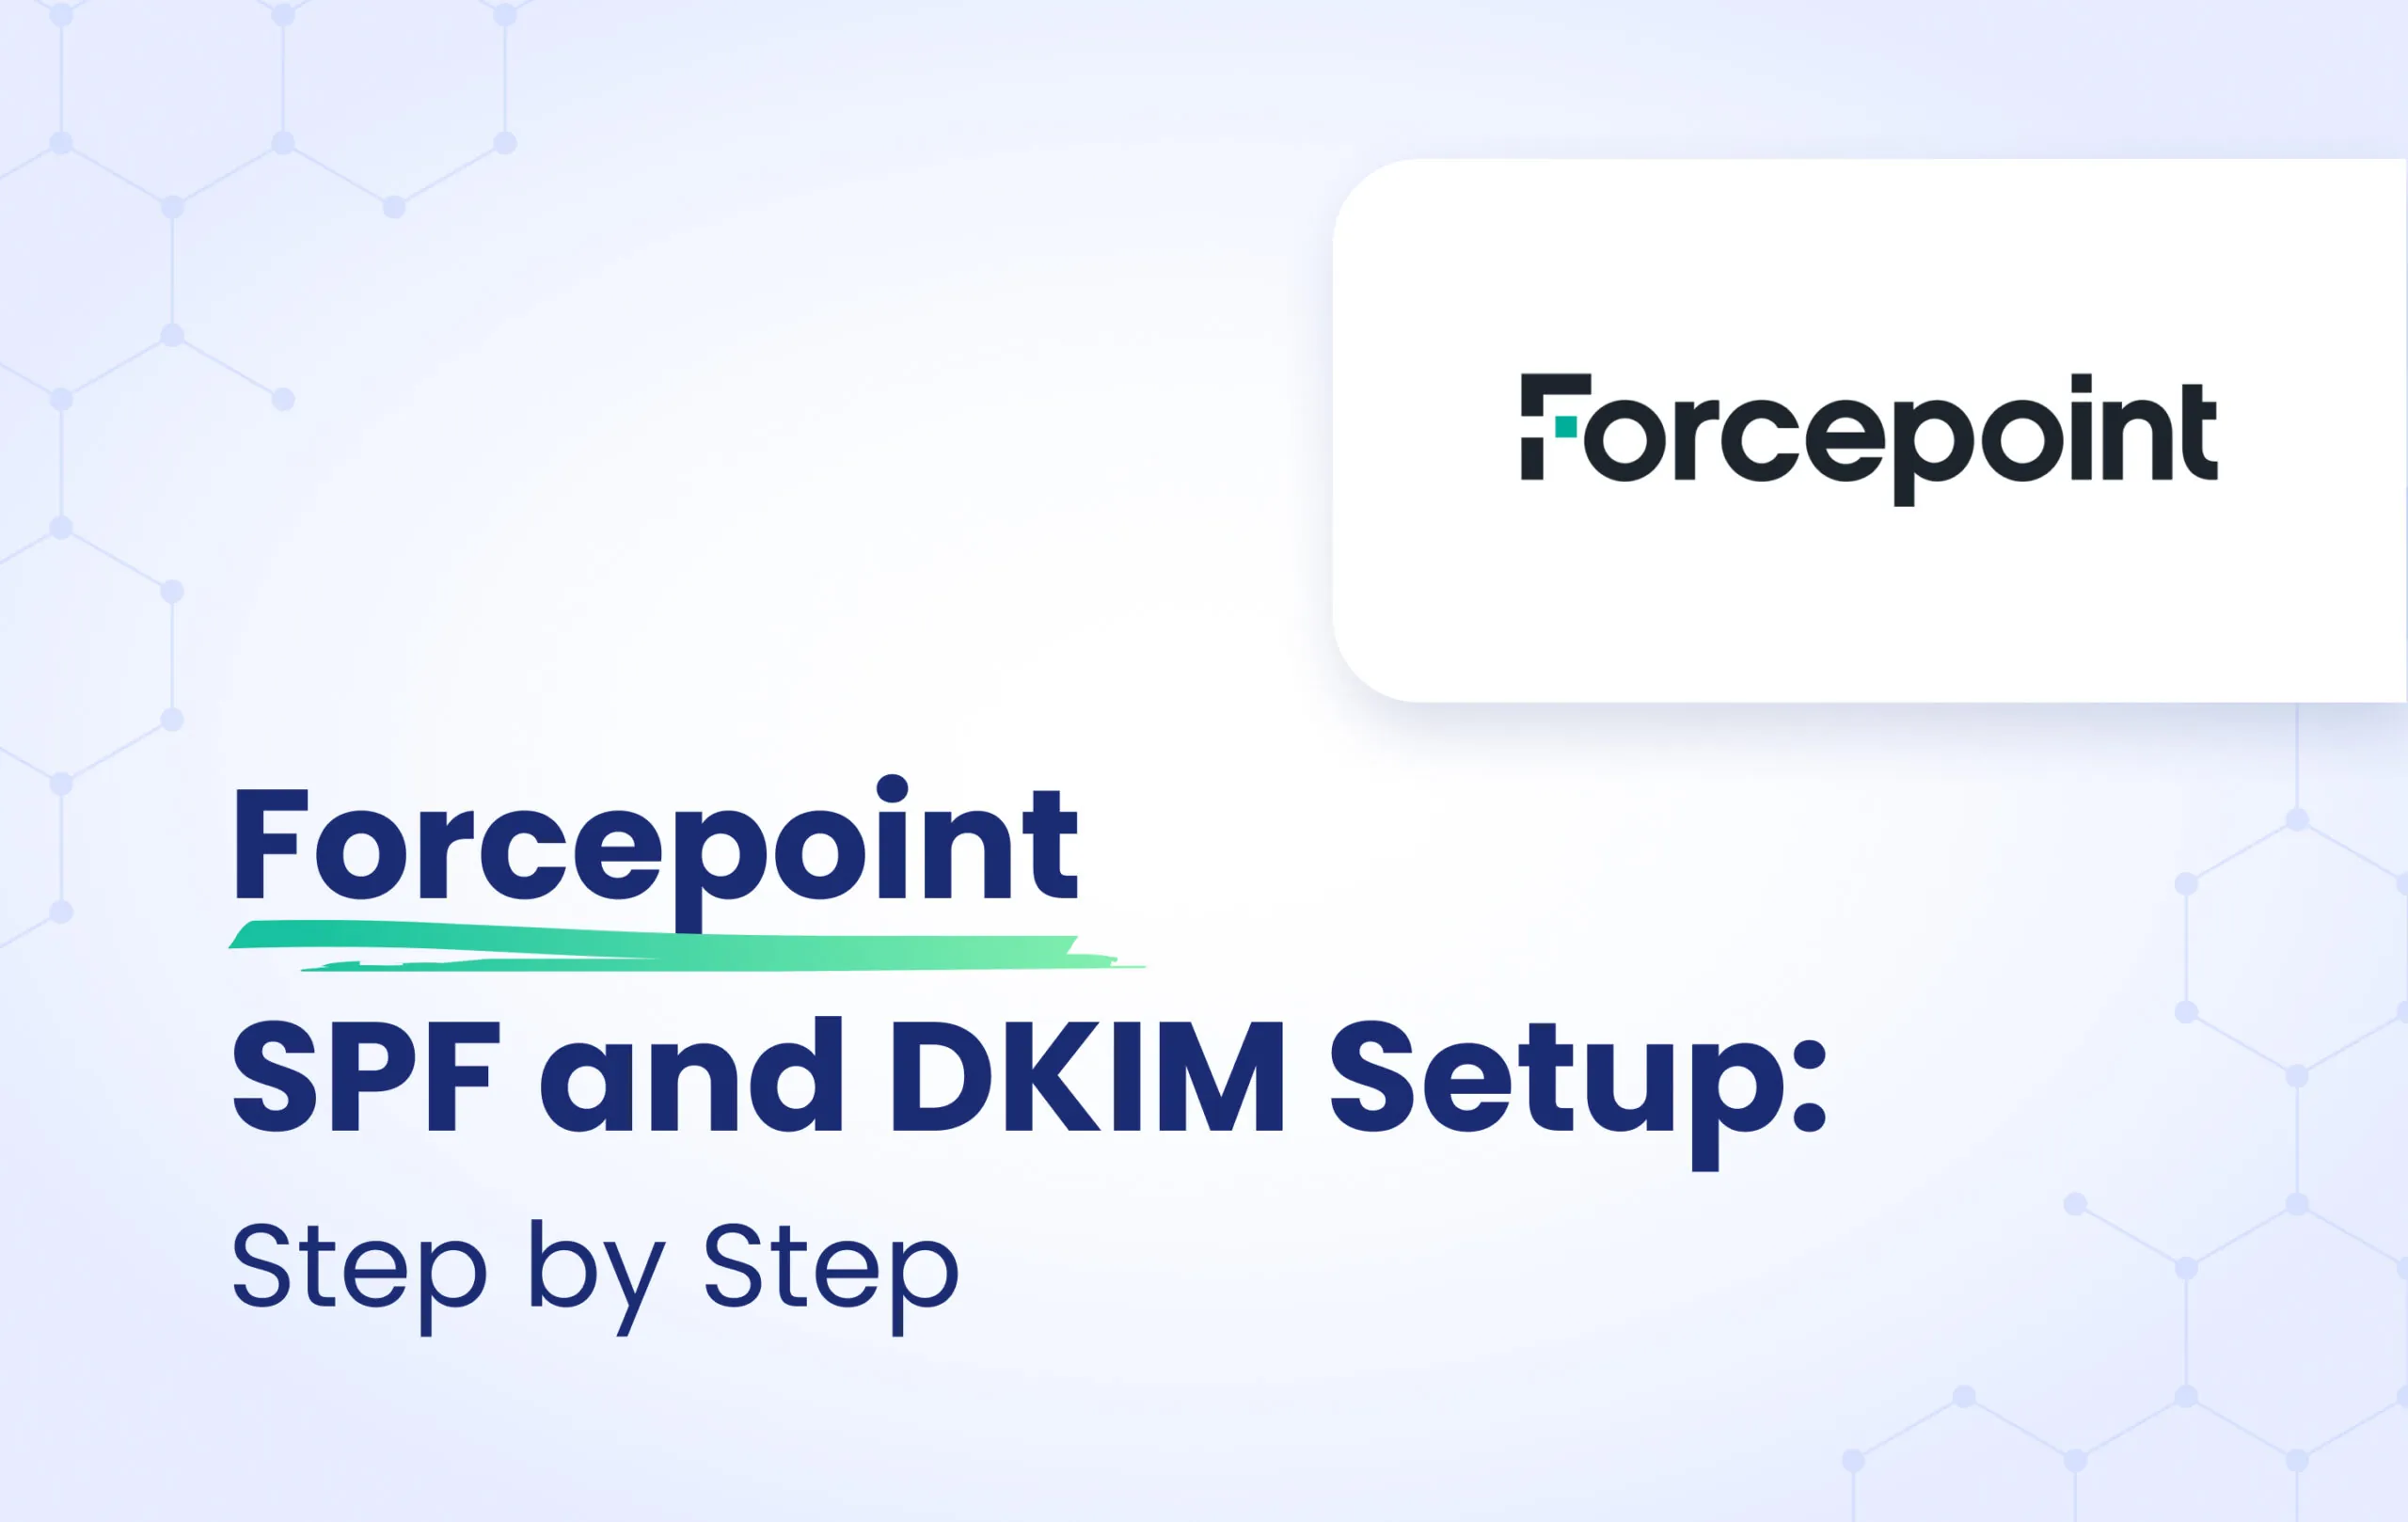 Forcepoint SPF and DKIM configuration